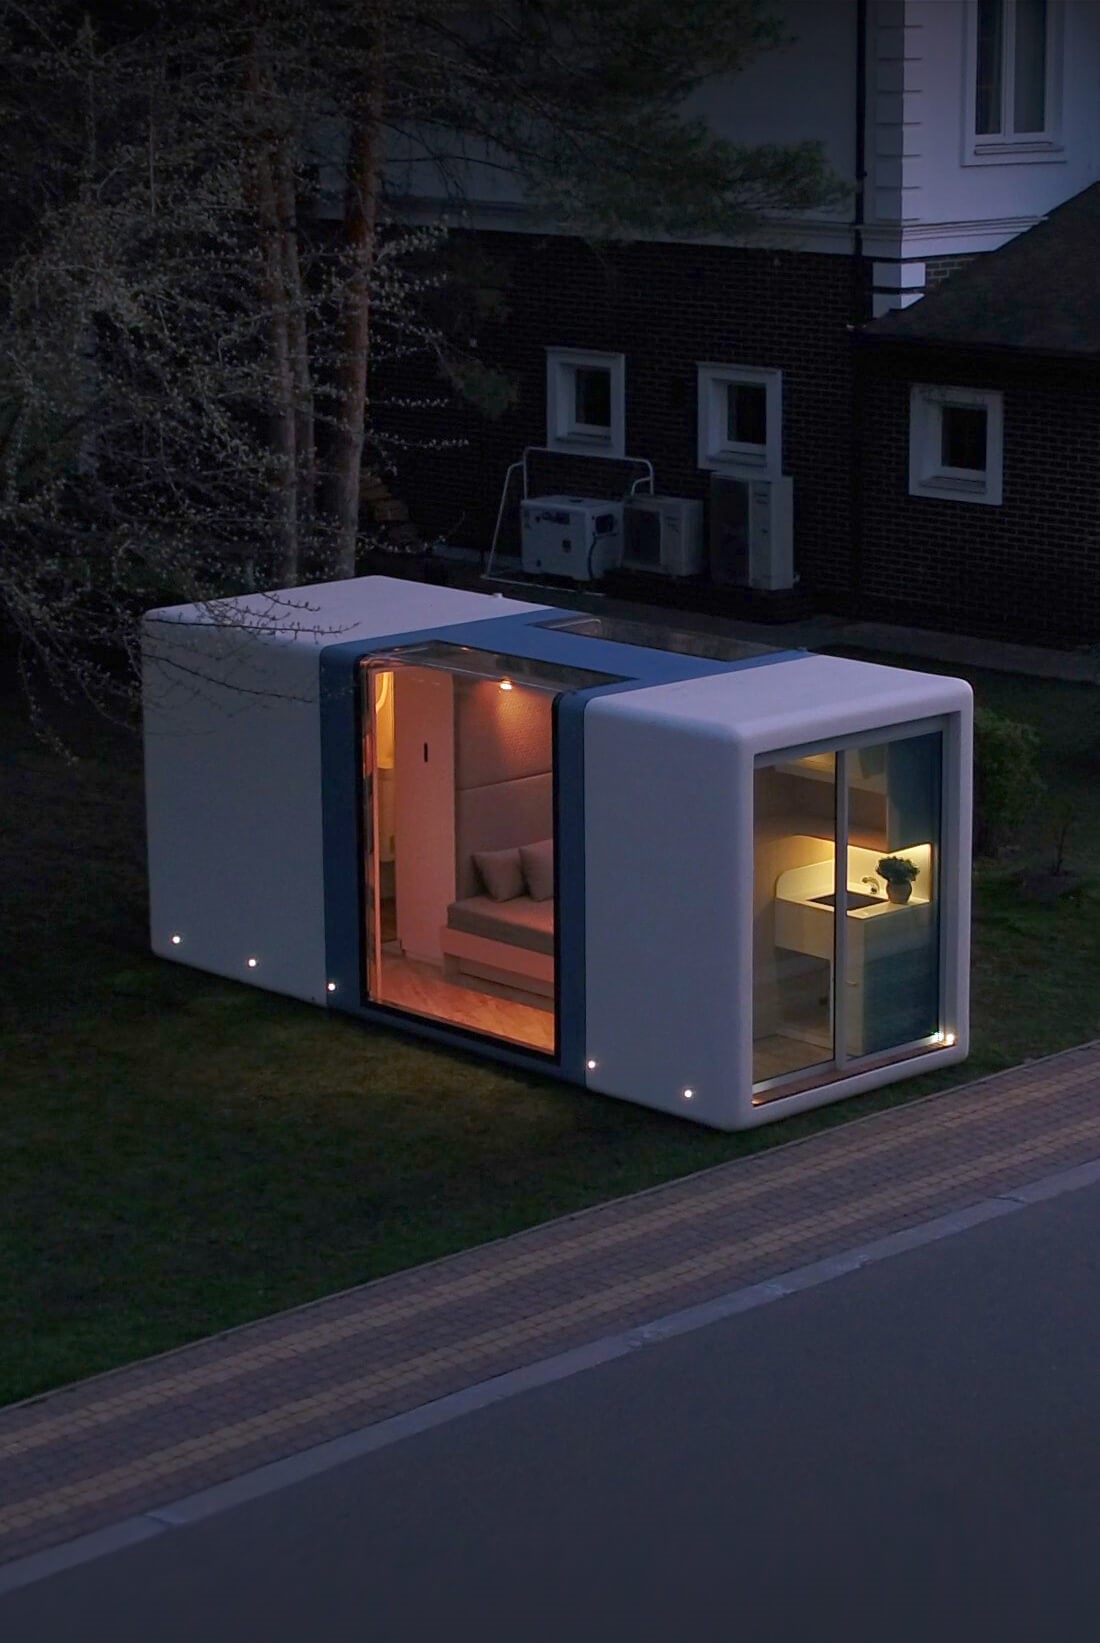 MicroHaus modern tiny home glows warmly; sited beside home at roadway's edge